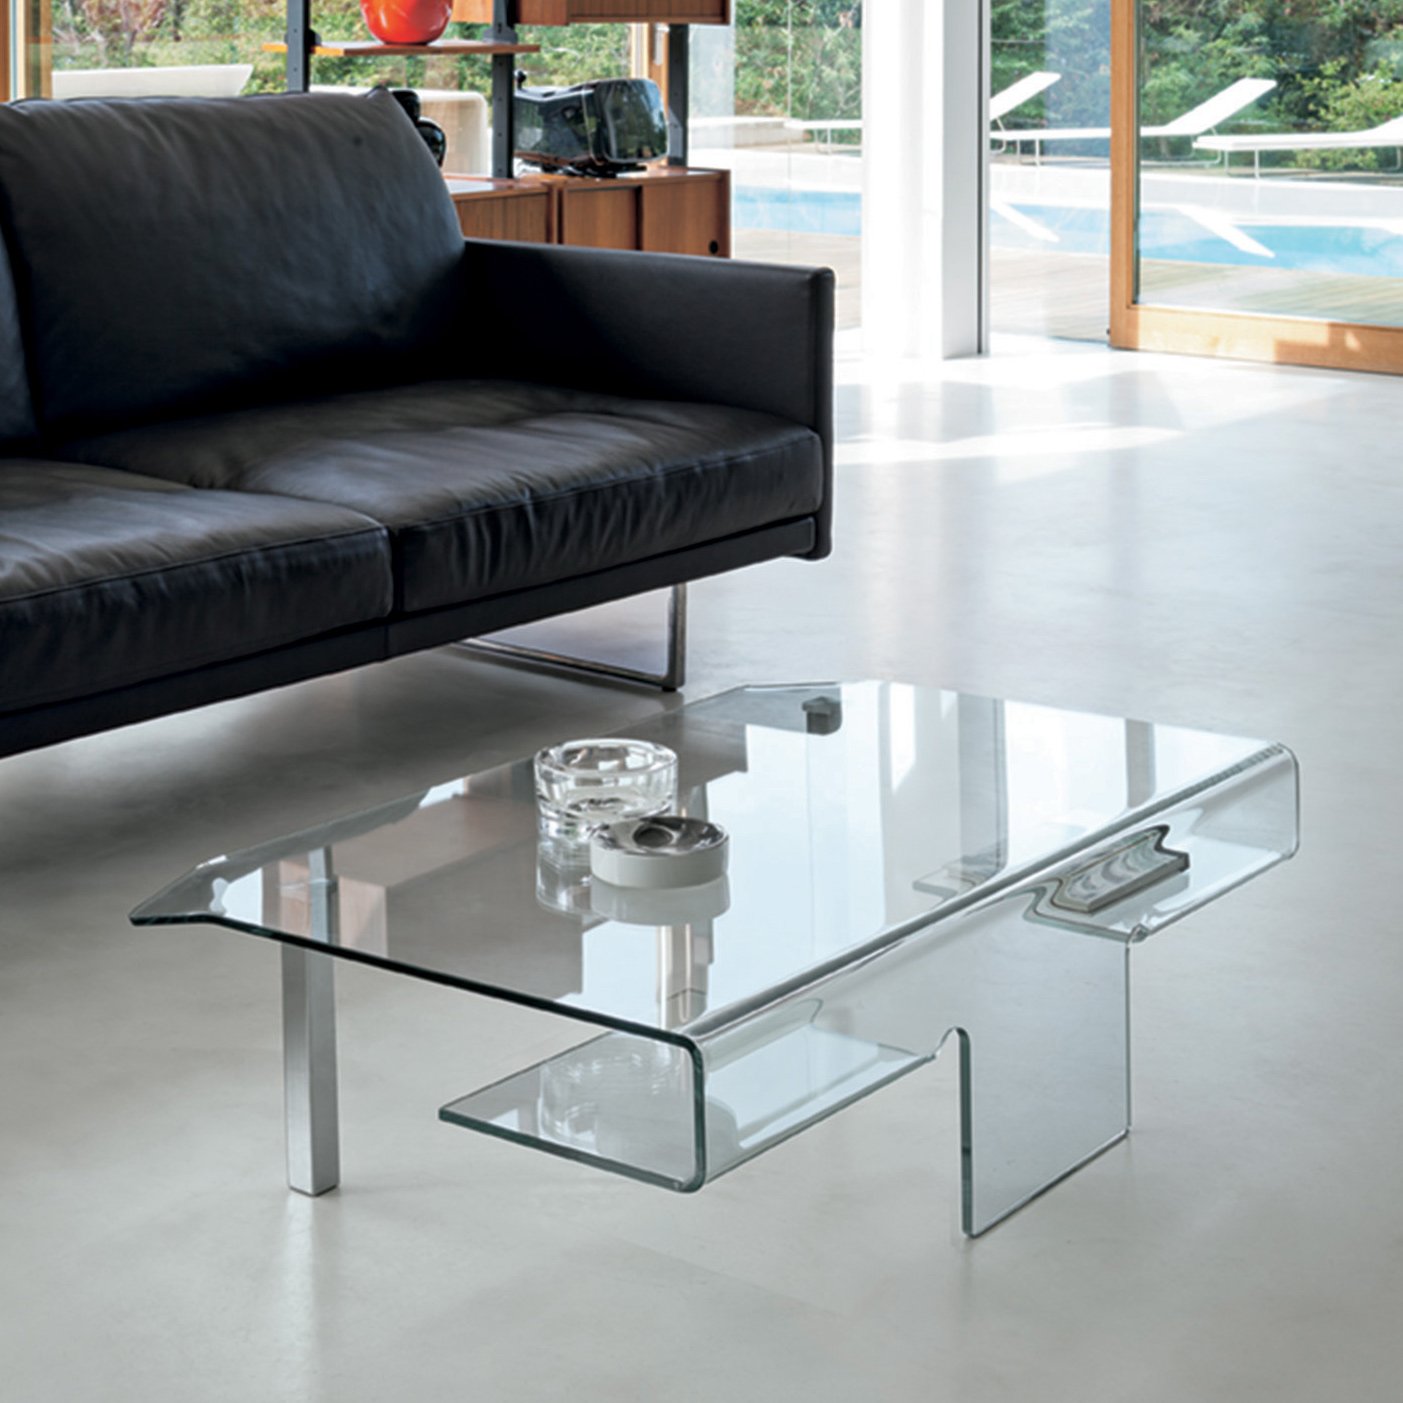 Aries Glass Coffee Table Target Point Living Room Furniture